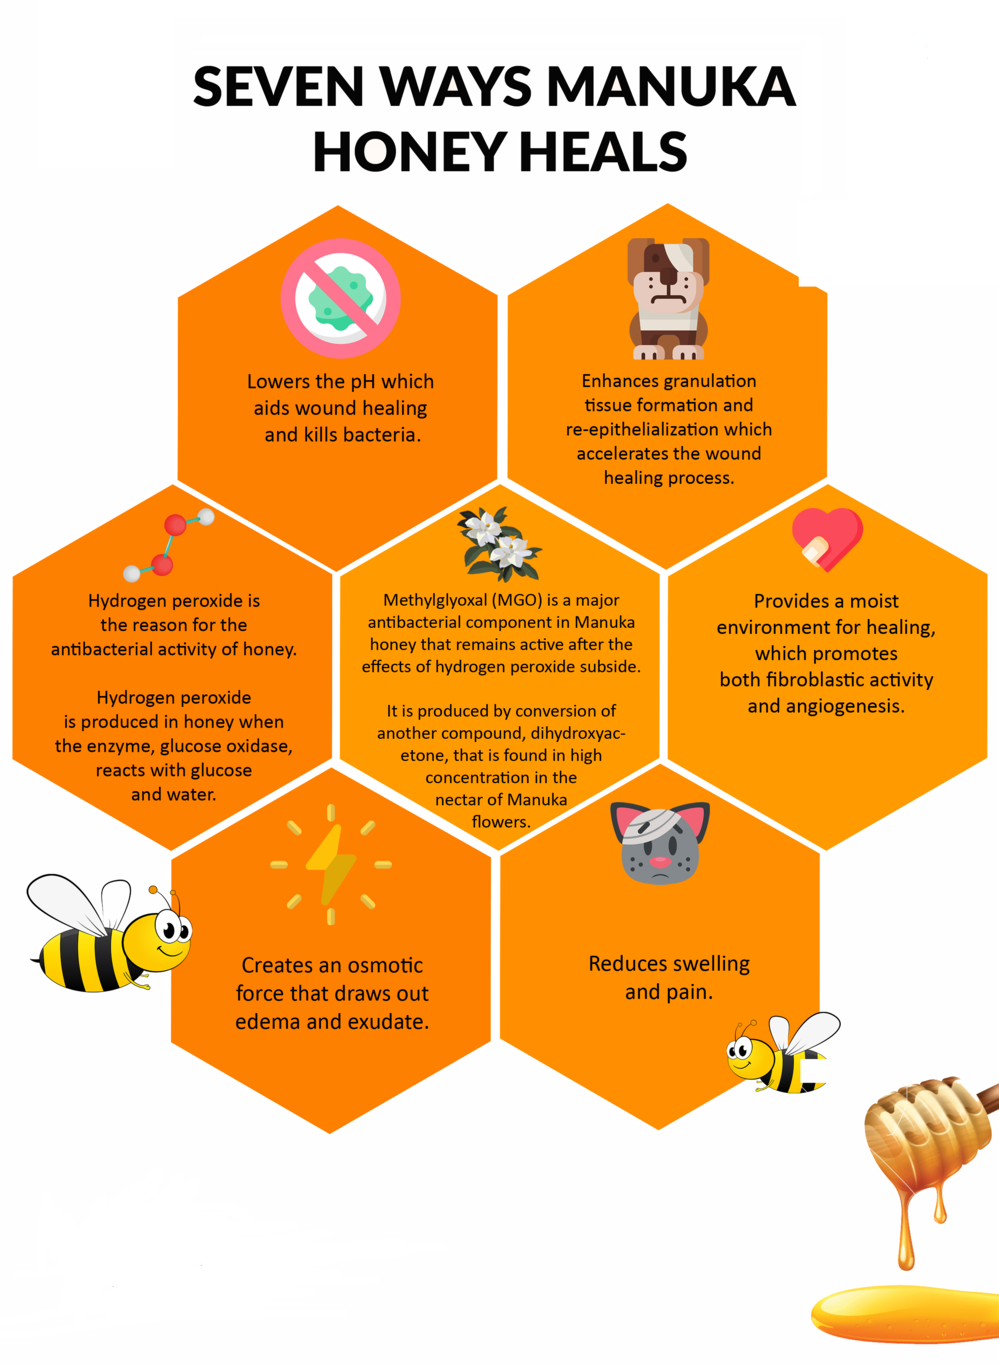 Pure Raw Manuka Honey for People or Pets